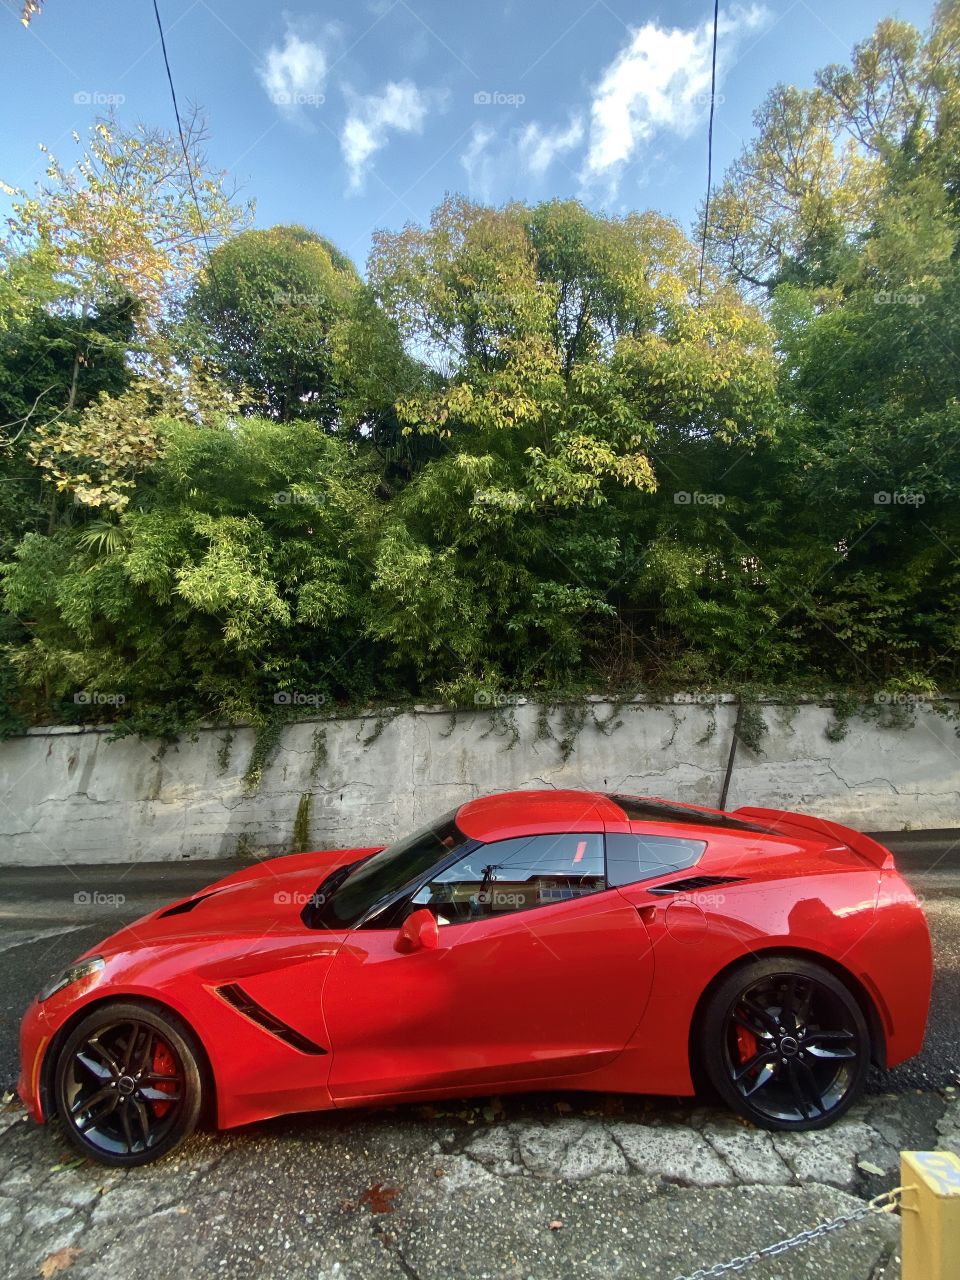 Fast contemporary sport car in red colorway.